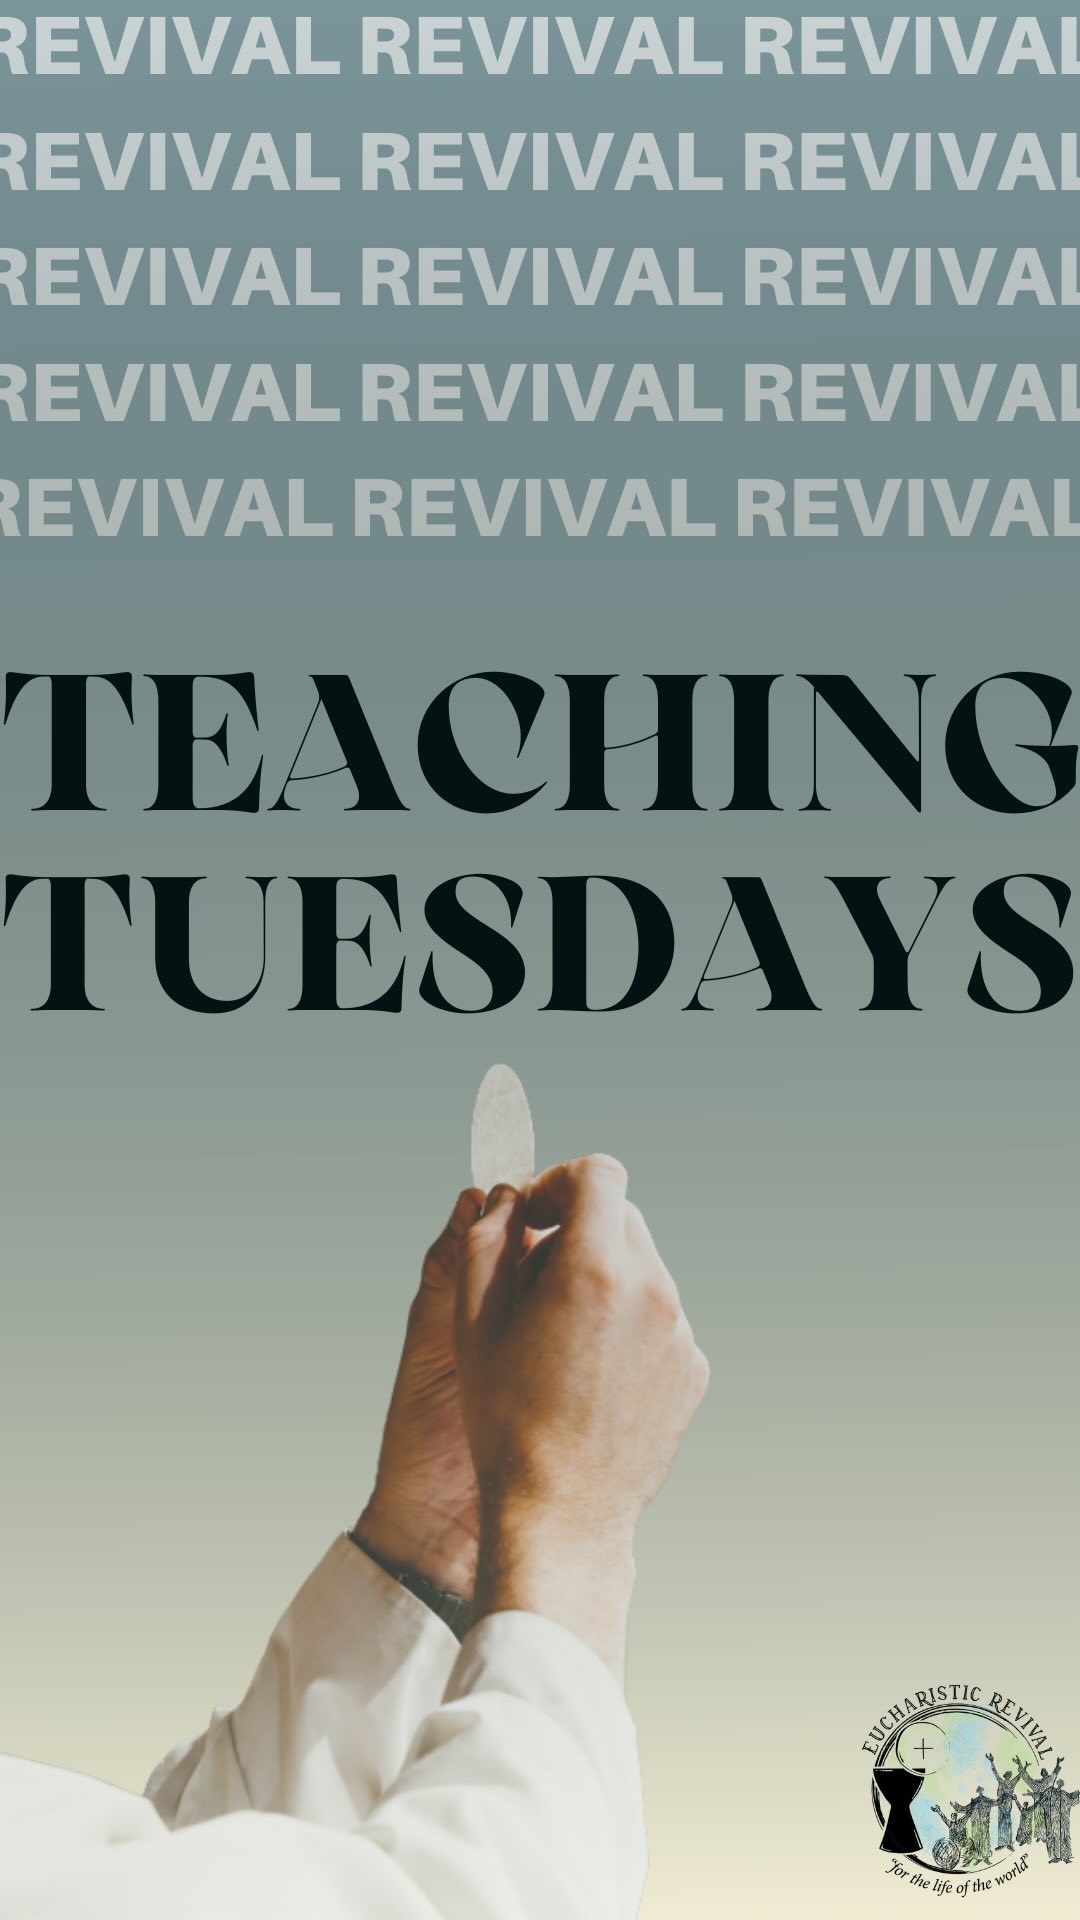 It’s Teaching Tuesday! Anne has another topic for us this week: Transubstantiation. 

This is the conversion of the substance of the bread and wine into the Body and Blood of Christ at the consecration. 

Check back every Tuesday for more videos on the Eucharistic Revival from Anne, lead member of the Eucharistic Revival education team!